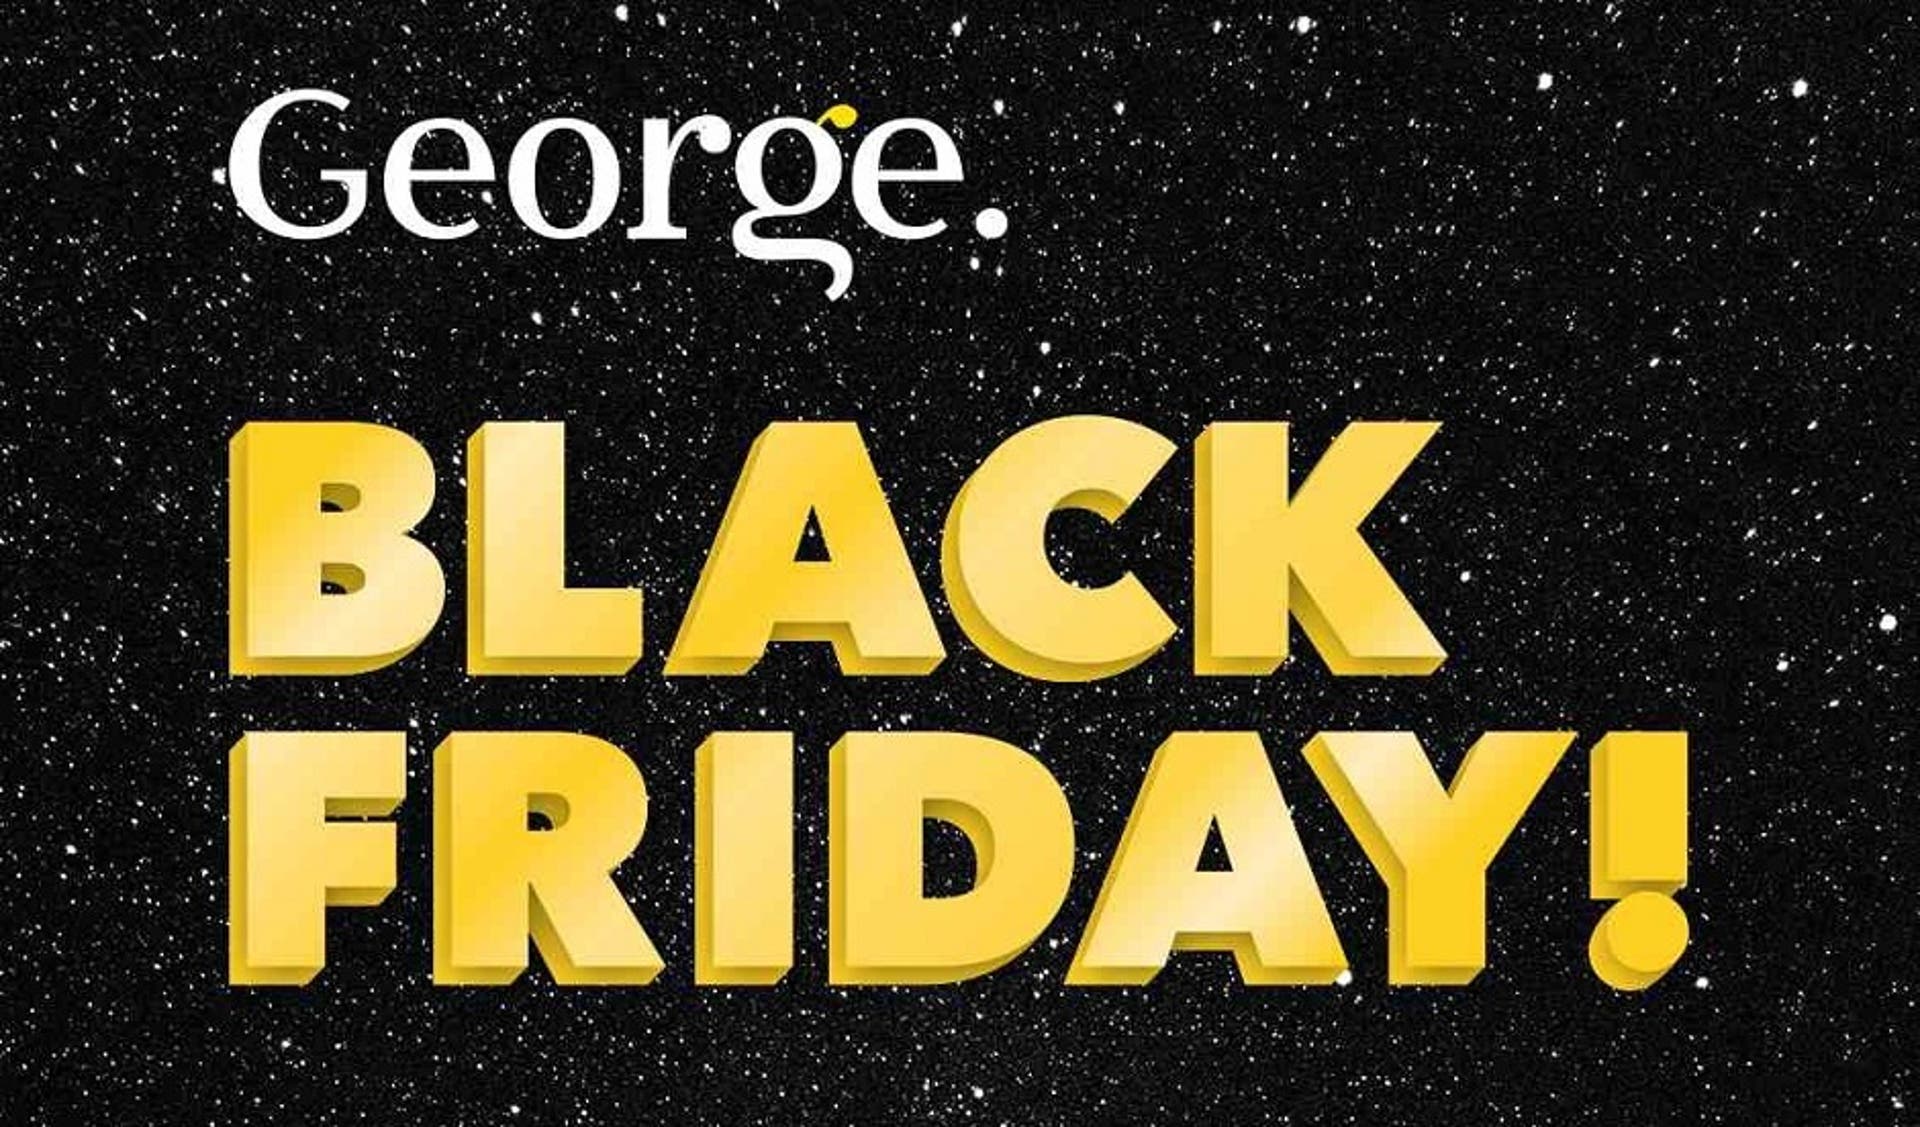 Up to 50% off in Christmas George Asda Sale: Savings on electricals and more